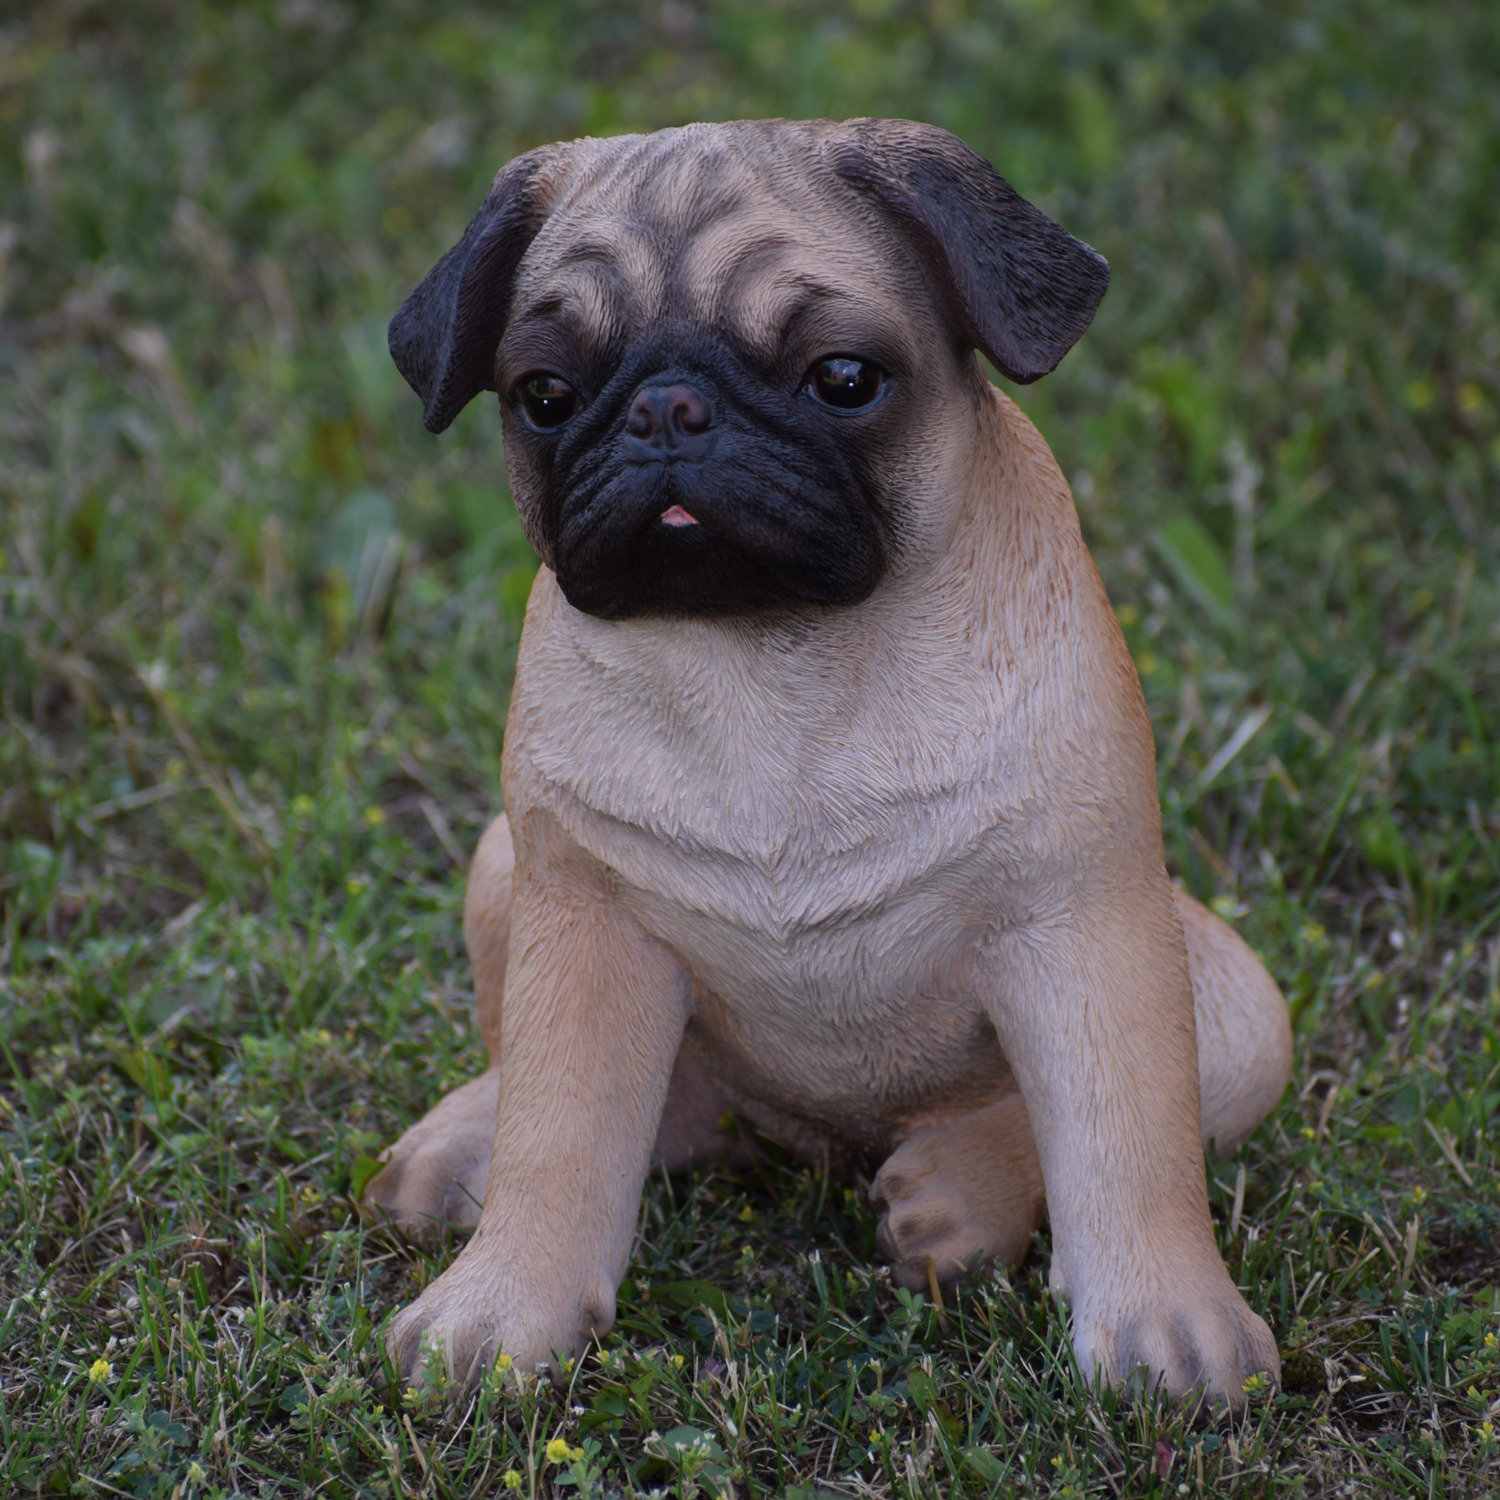 Pug. Three months old female dog with rare fur color silver gray sitting on  a gray sheepskin. Germany - SuperStock